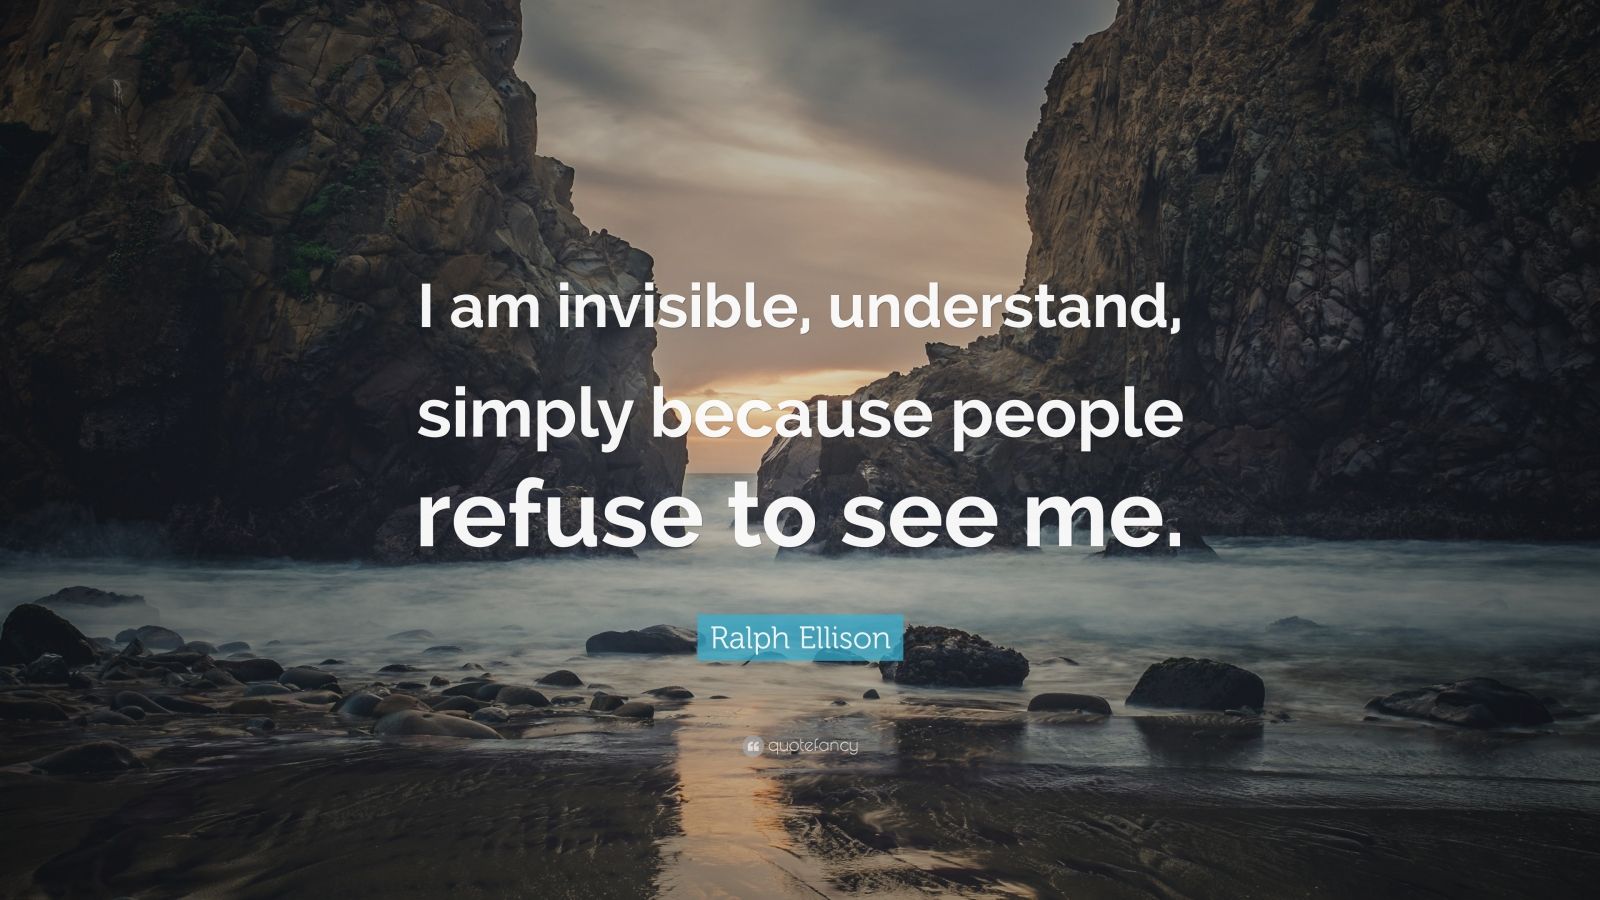 Ralph Ellison Quote: “I am invisible, understand, simply because people